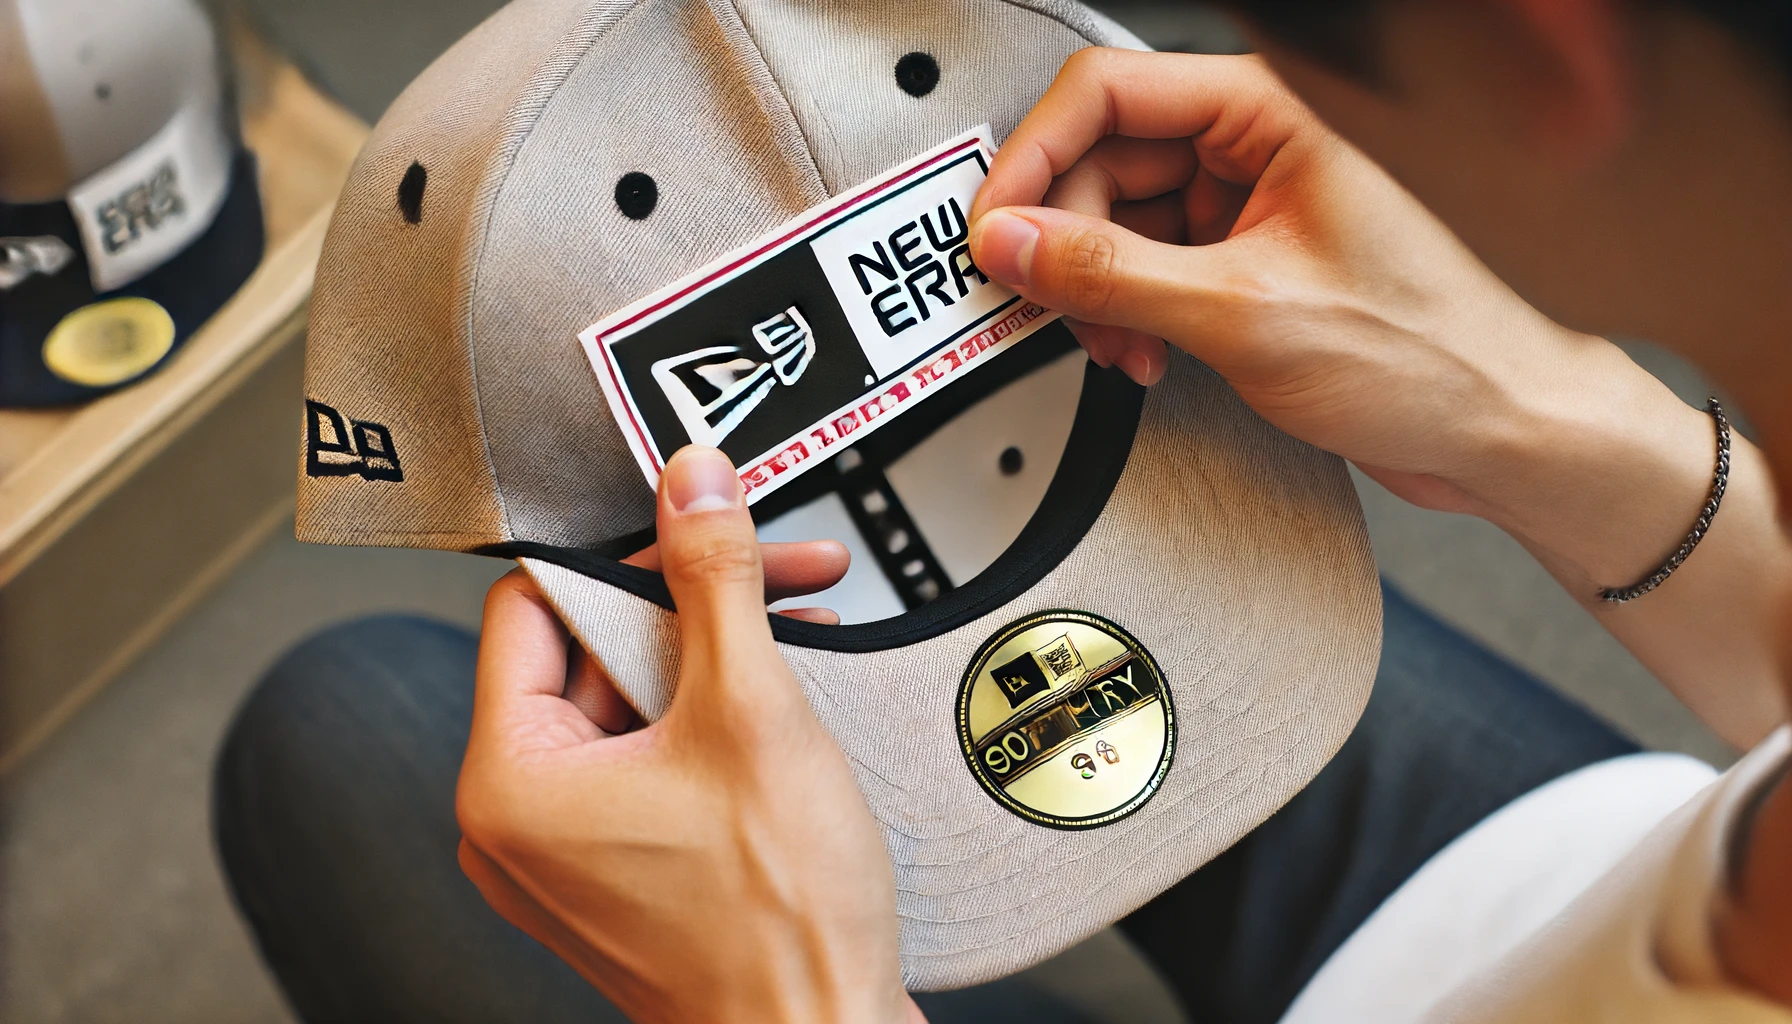 A Japanese person sticking a New Era cap sticker to the inside of the cap. The person is carefully placing the sticker on the inner side of the cap's brim.